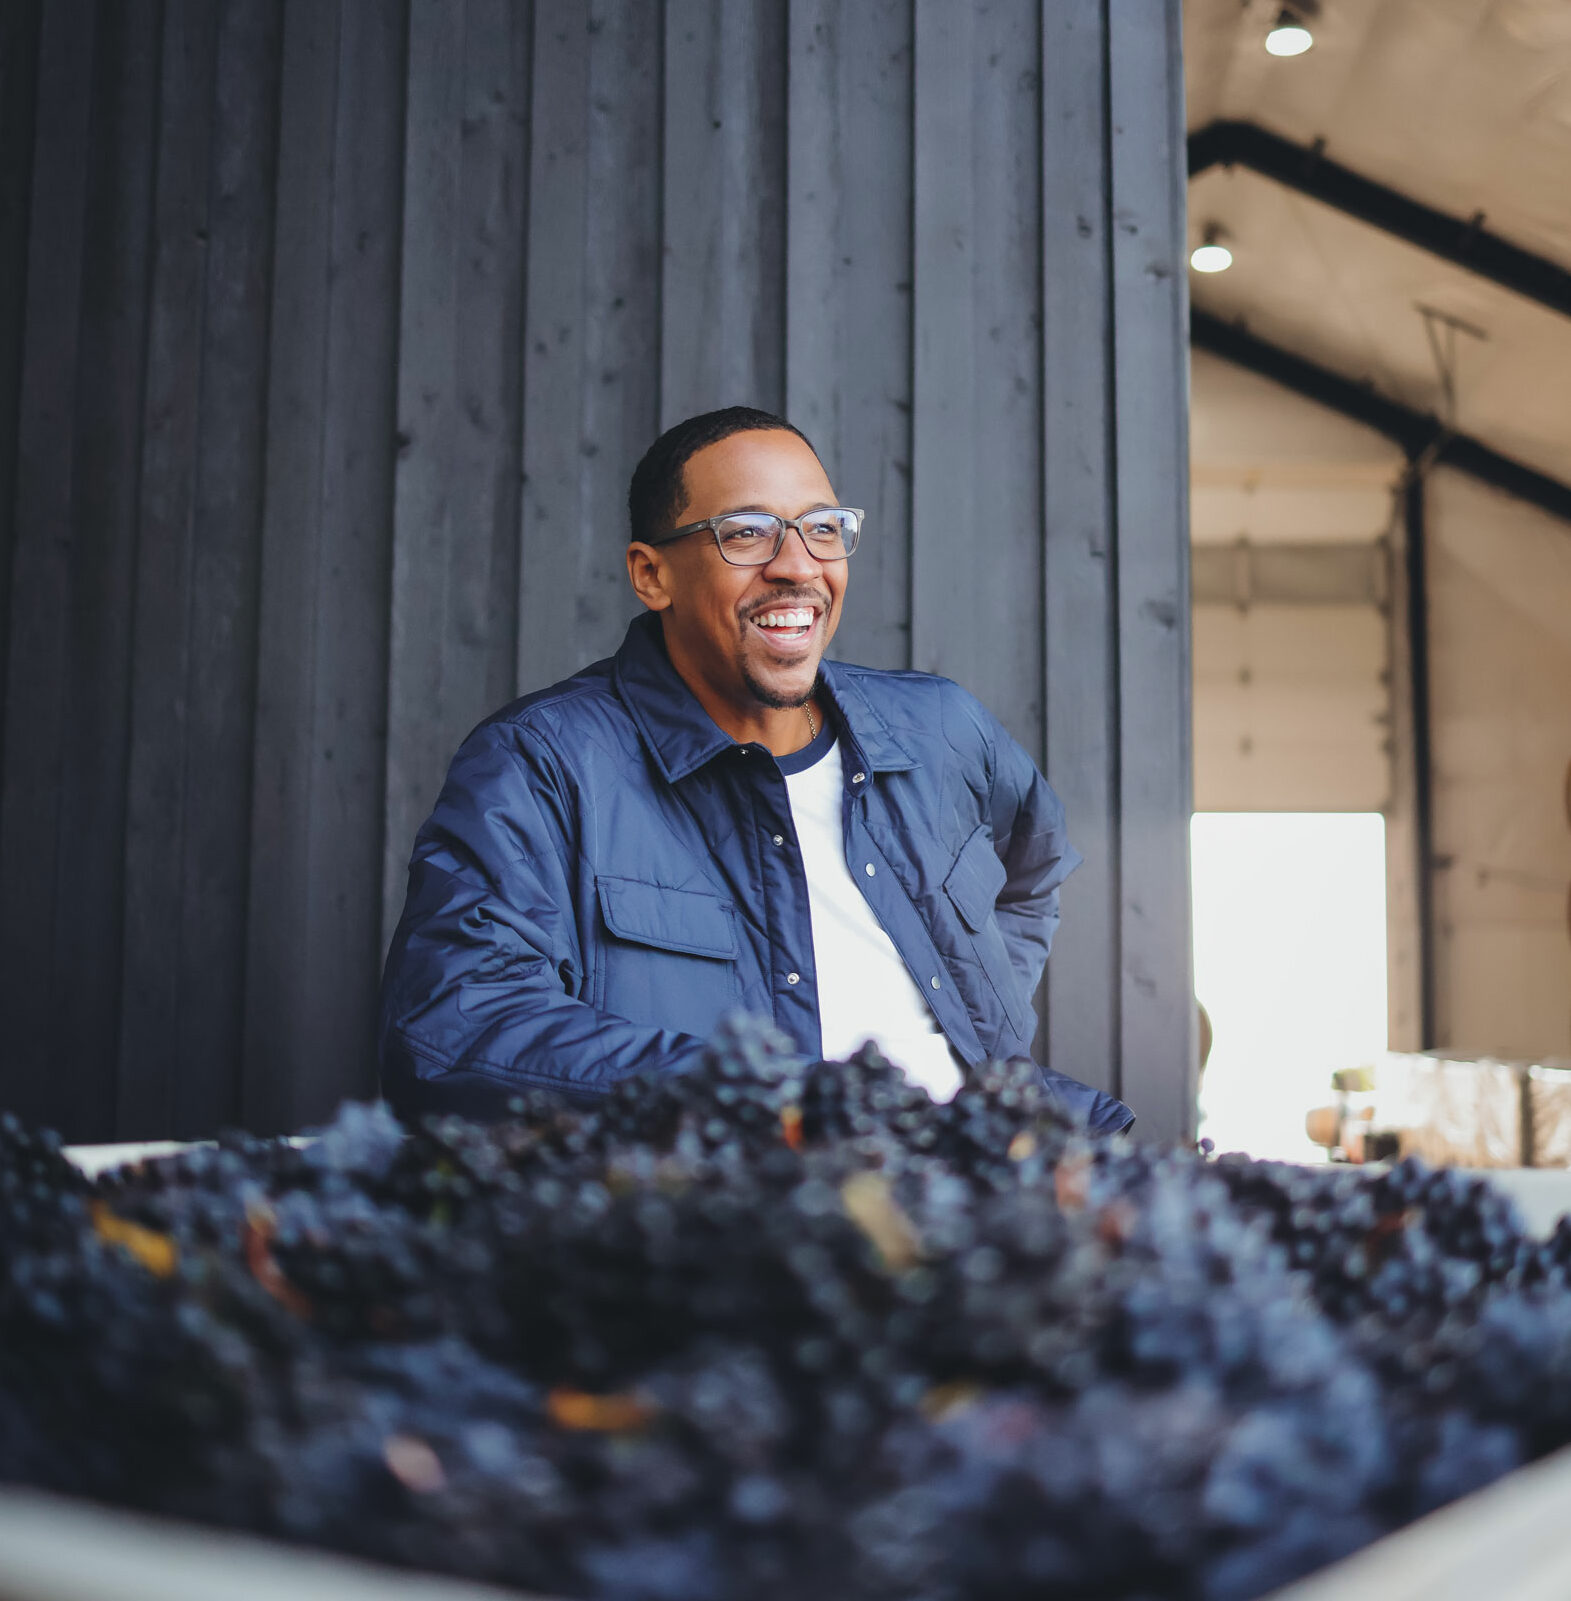 Channing Frye smiling after a fruitful harvest at Chosen Family Wines